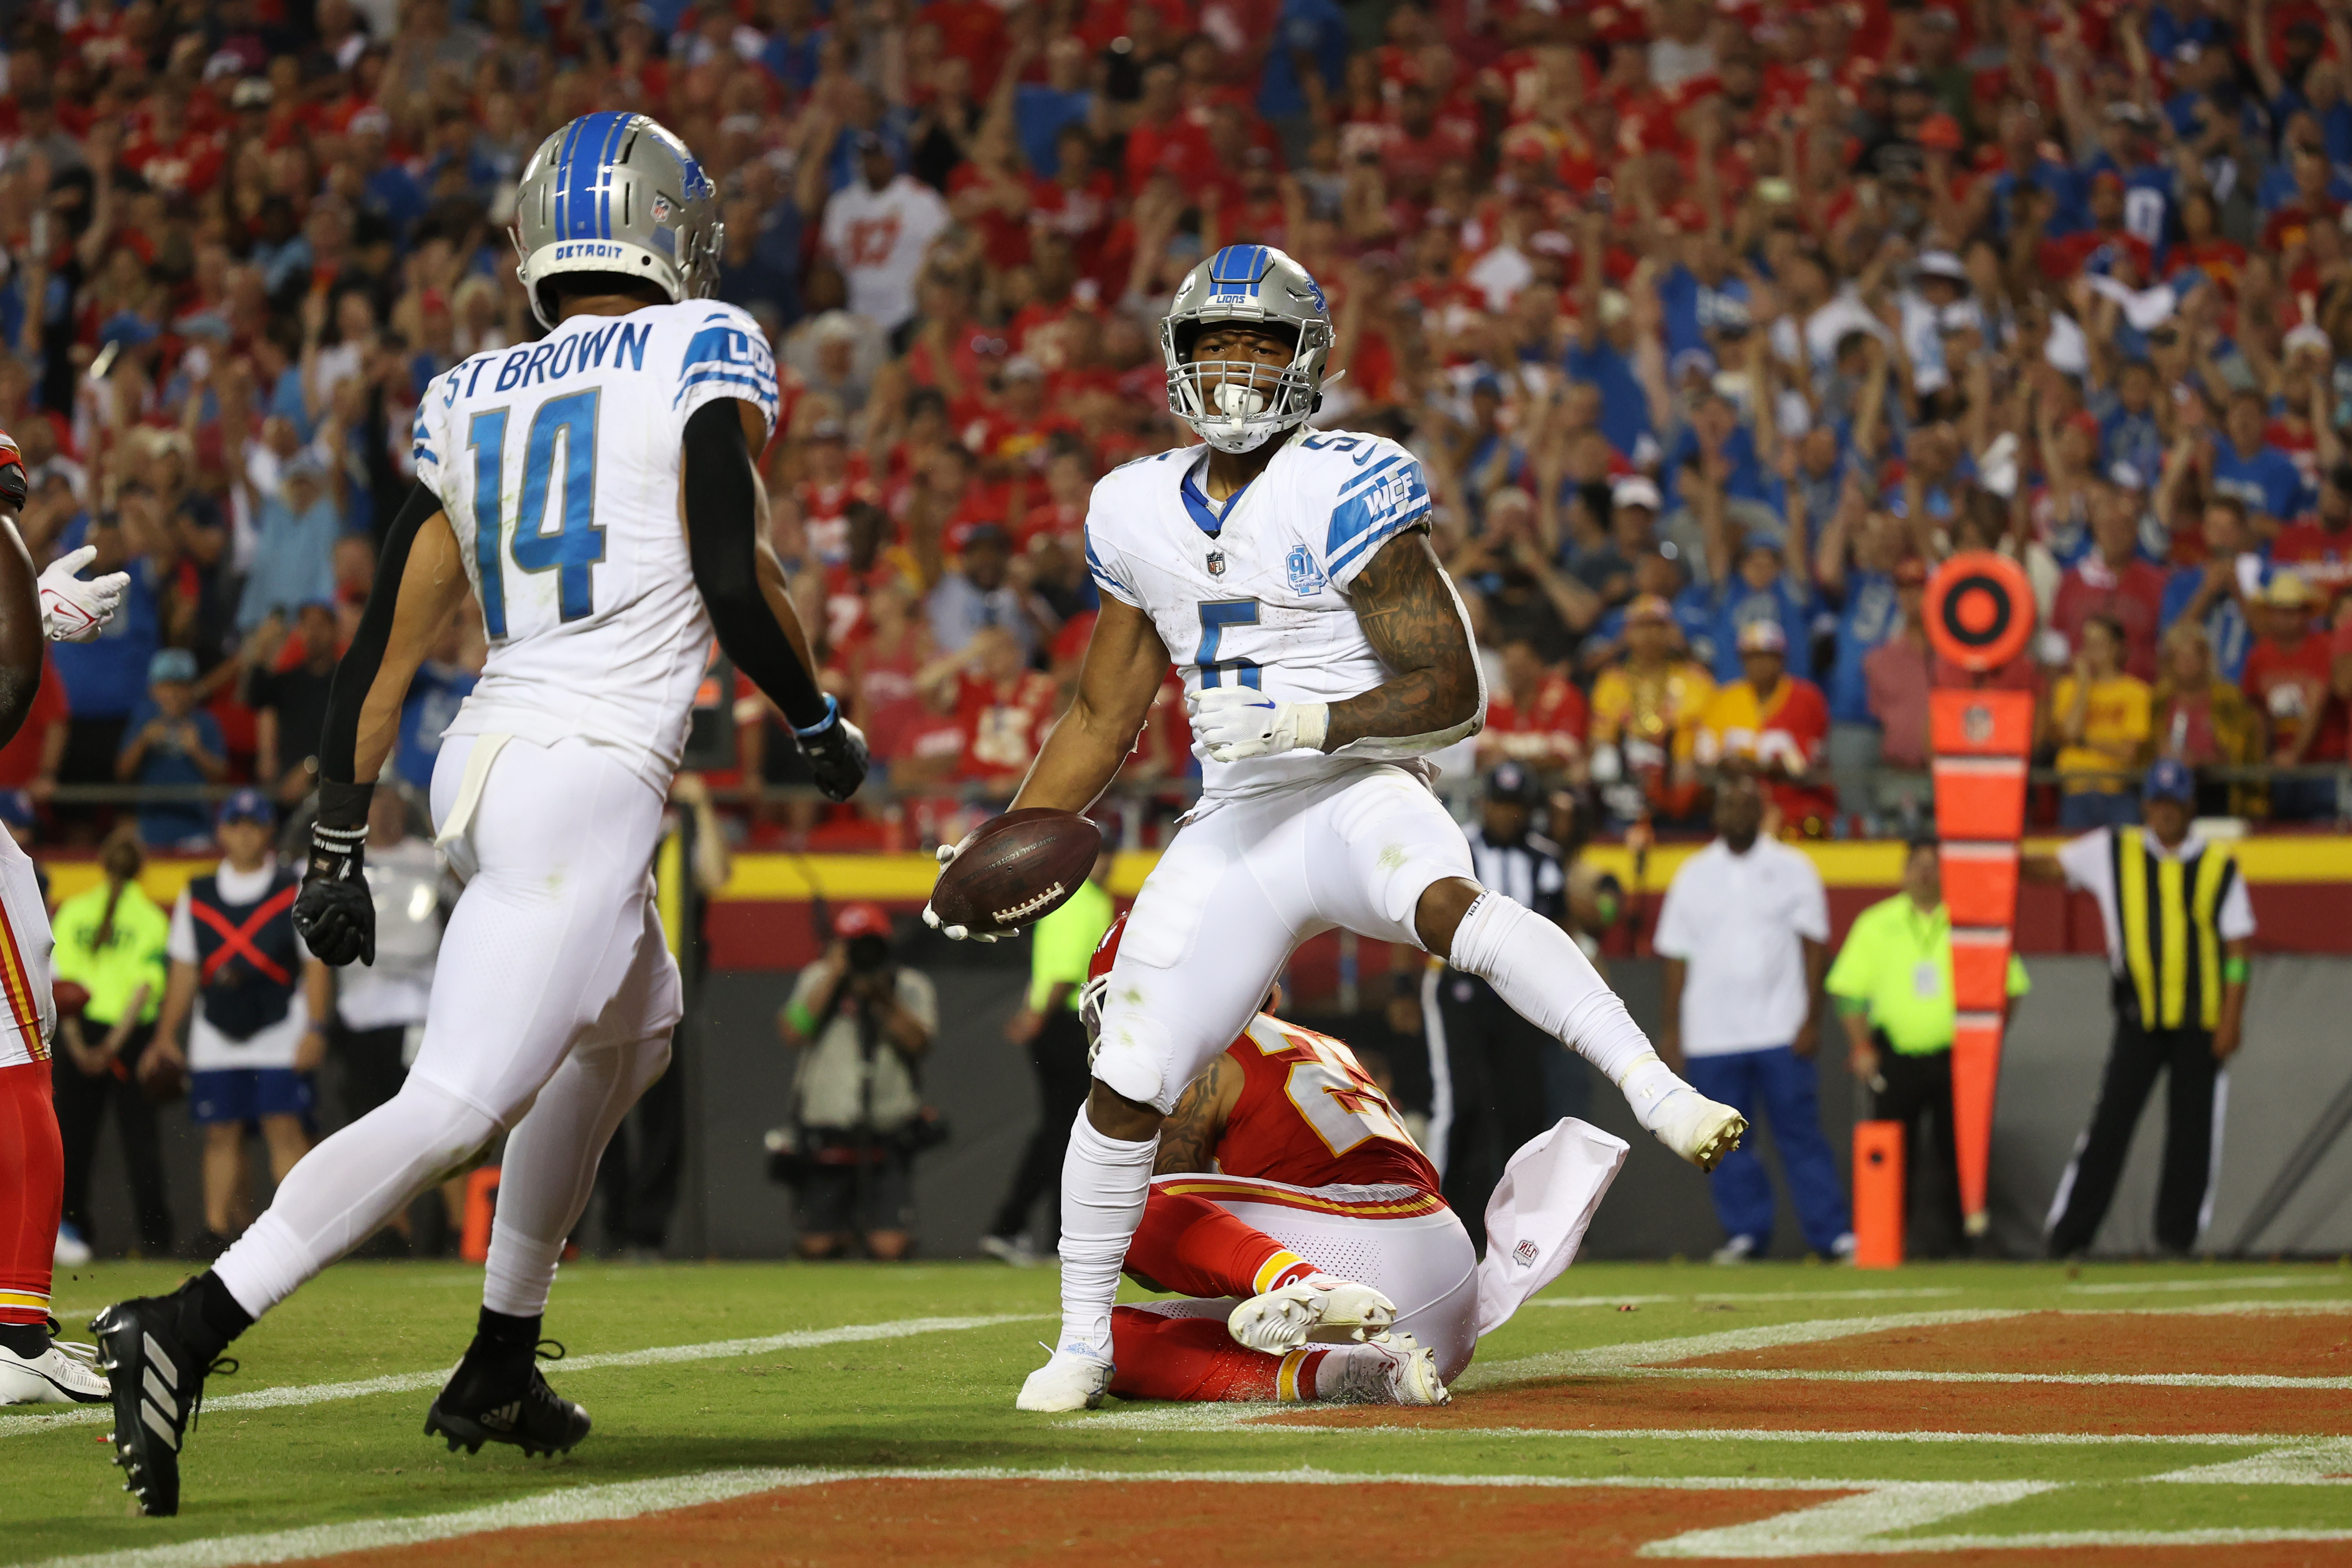 Lions edge out Super Bowl champion Chiefs in NFL season opener, NFL